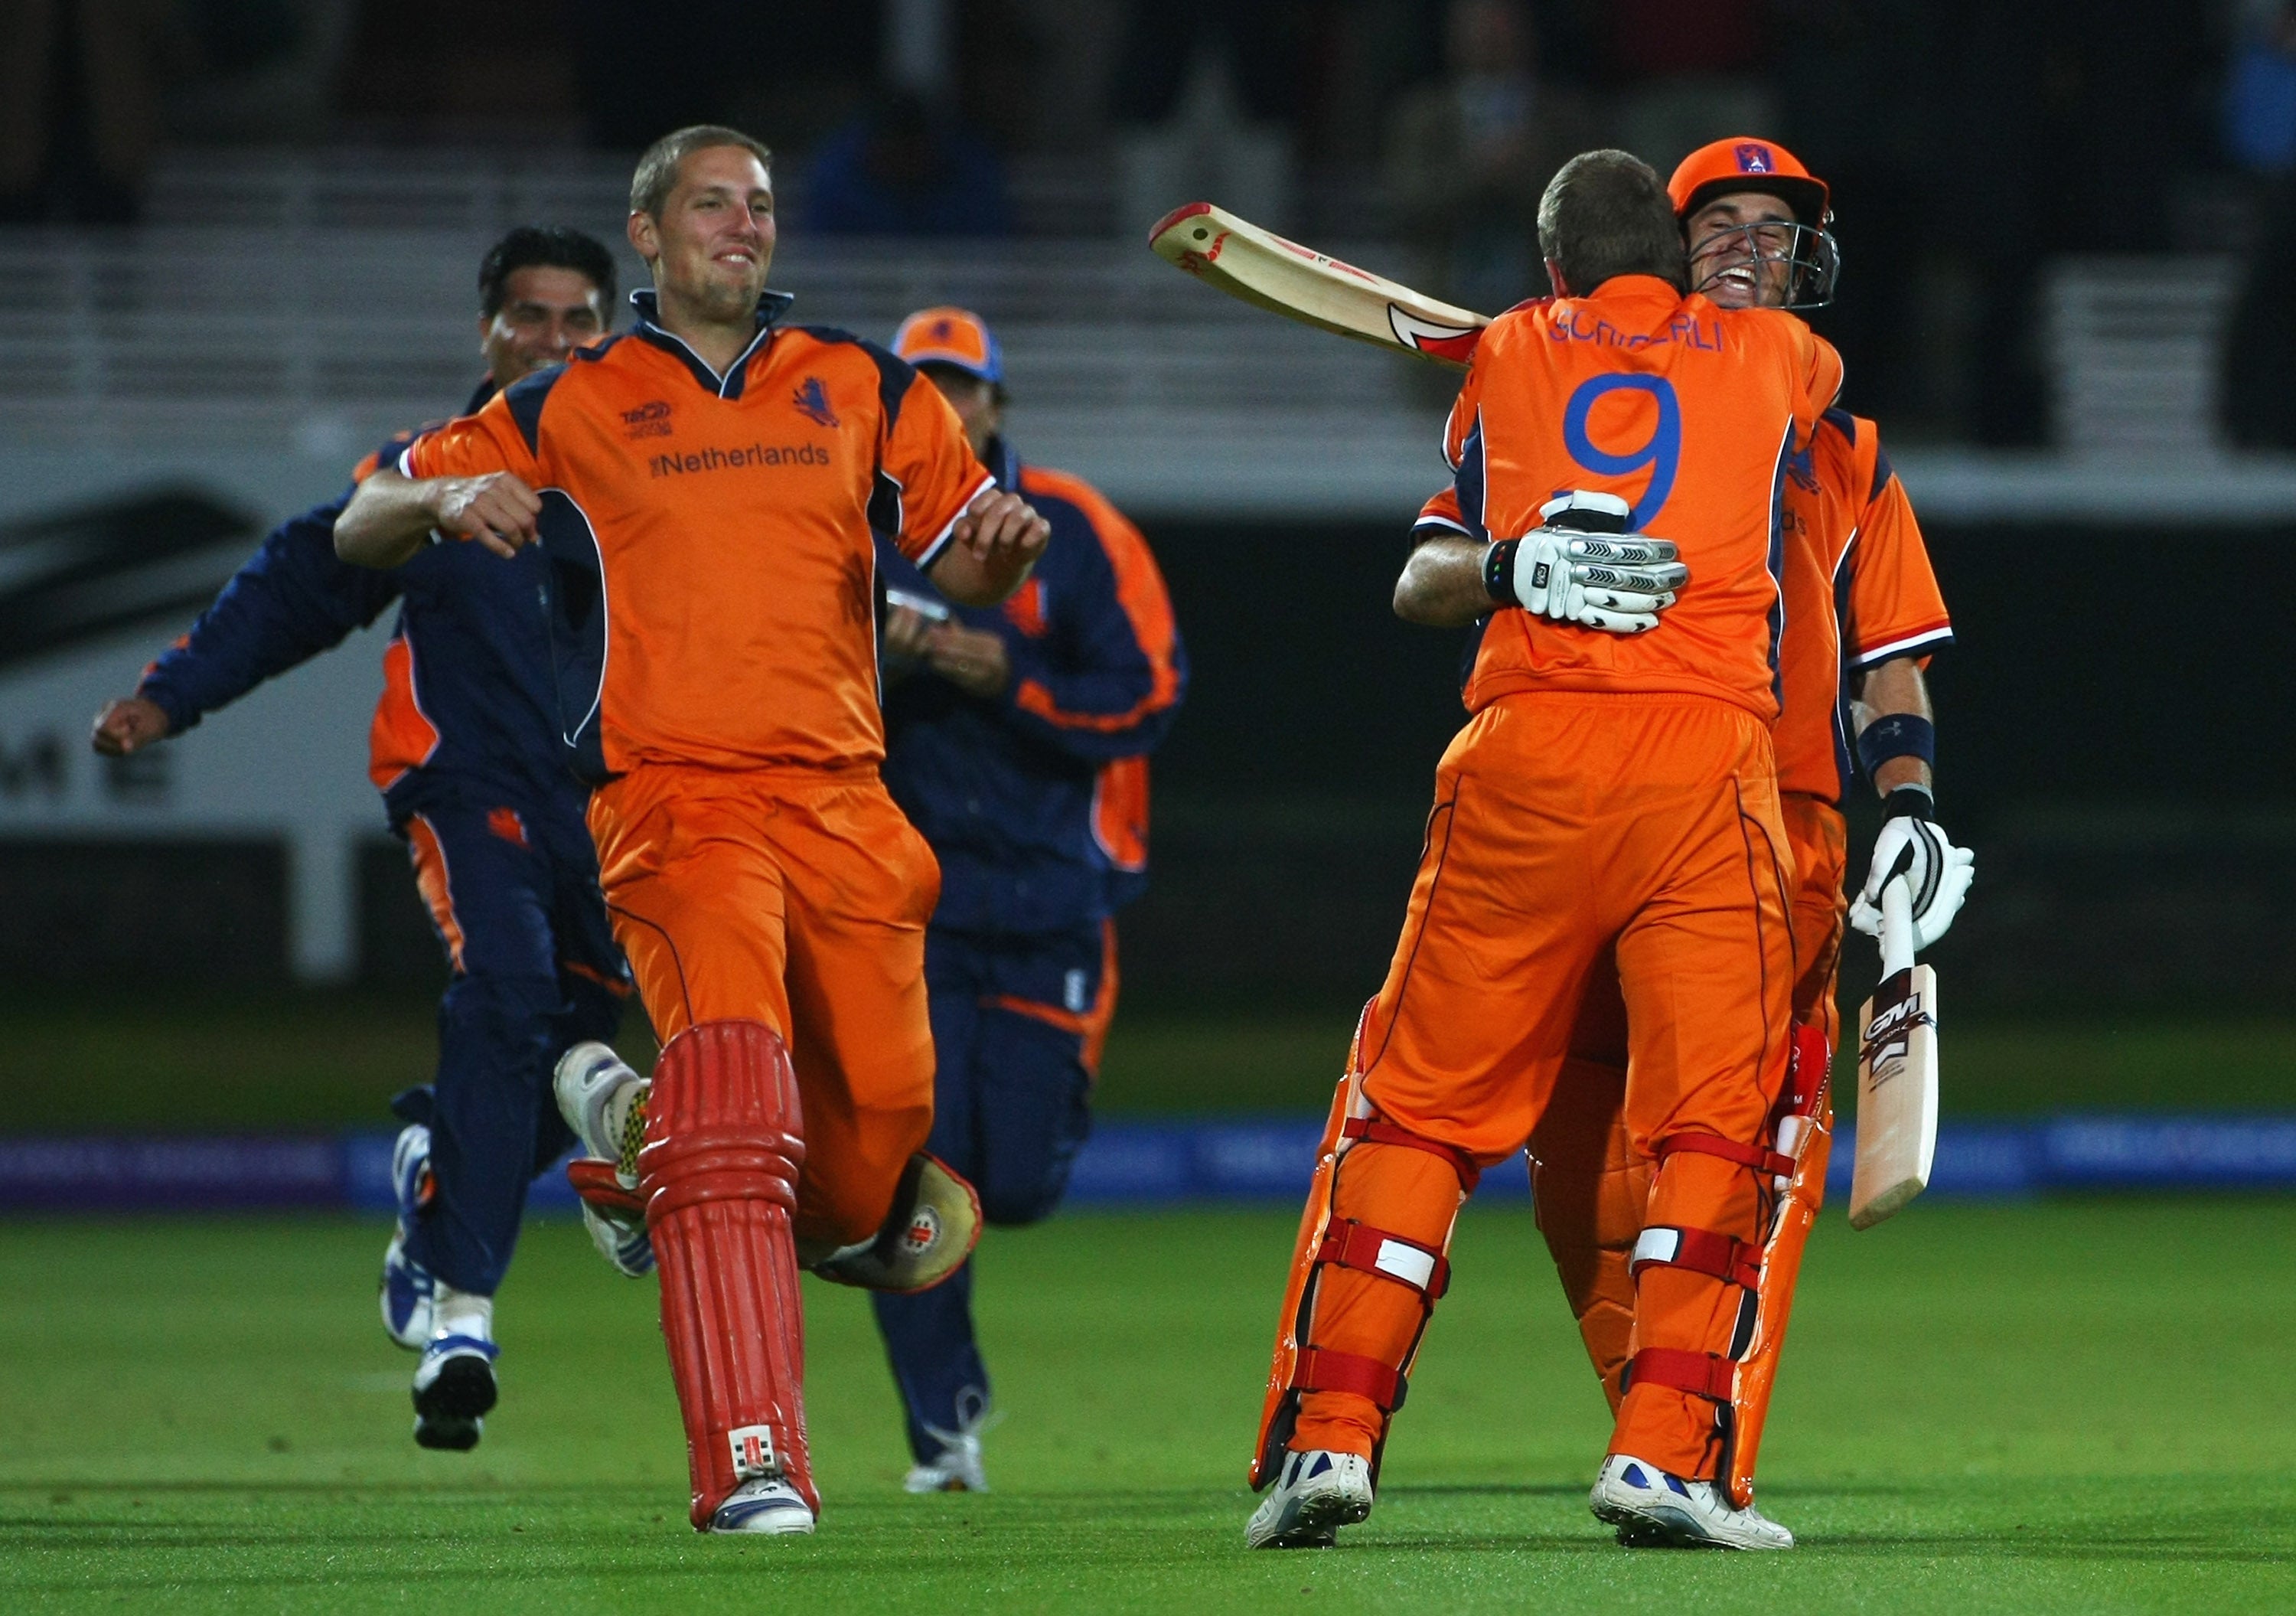 Netherlands produced one of the biggest shocks in cricket history after beating England in 2009